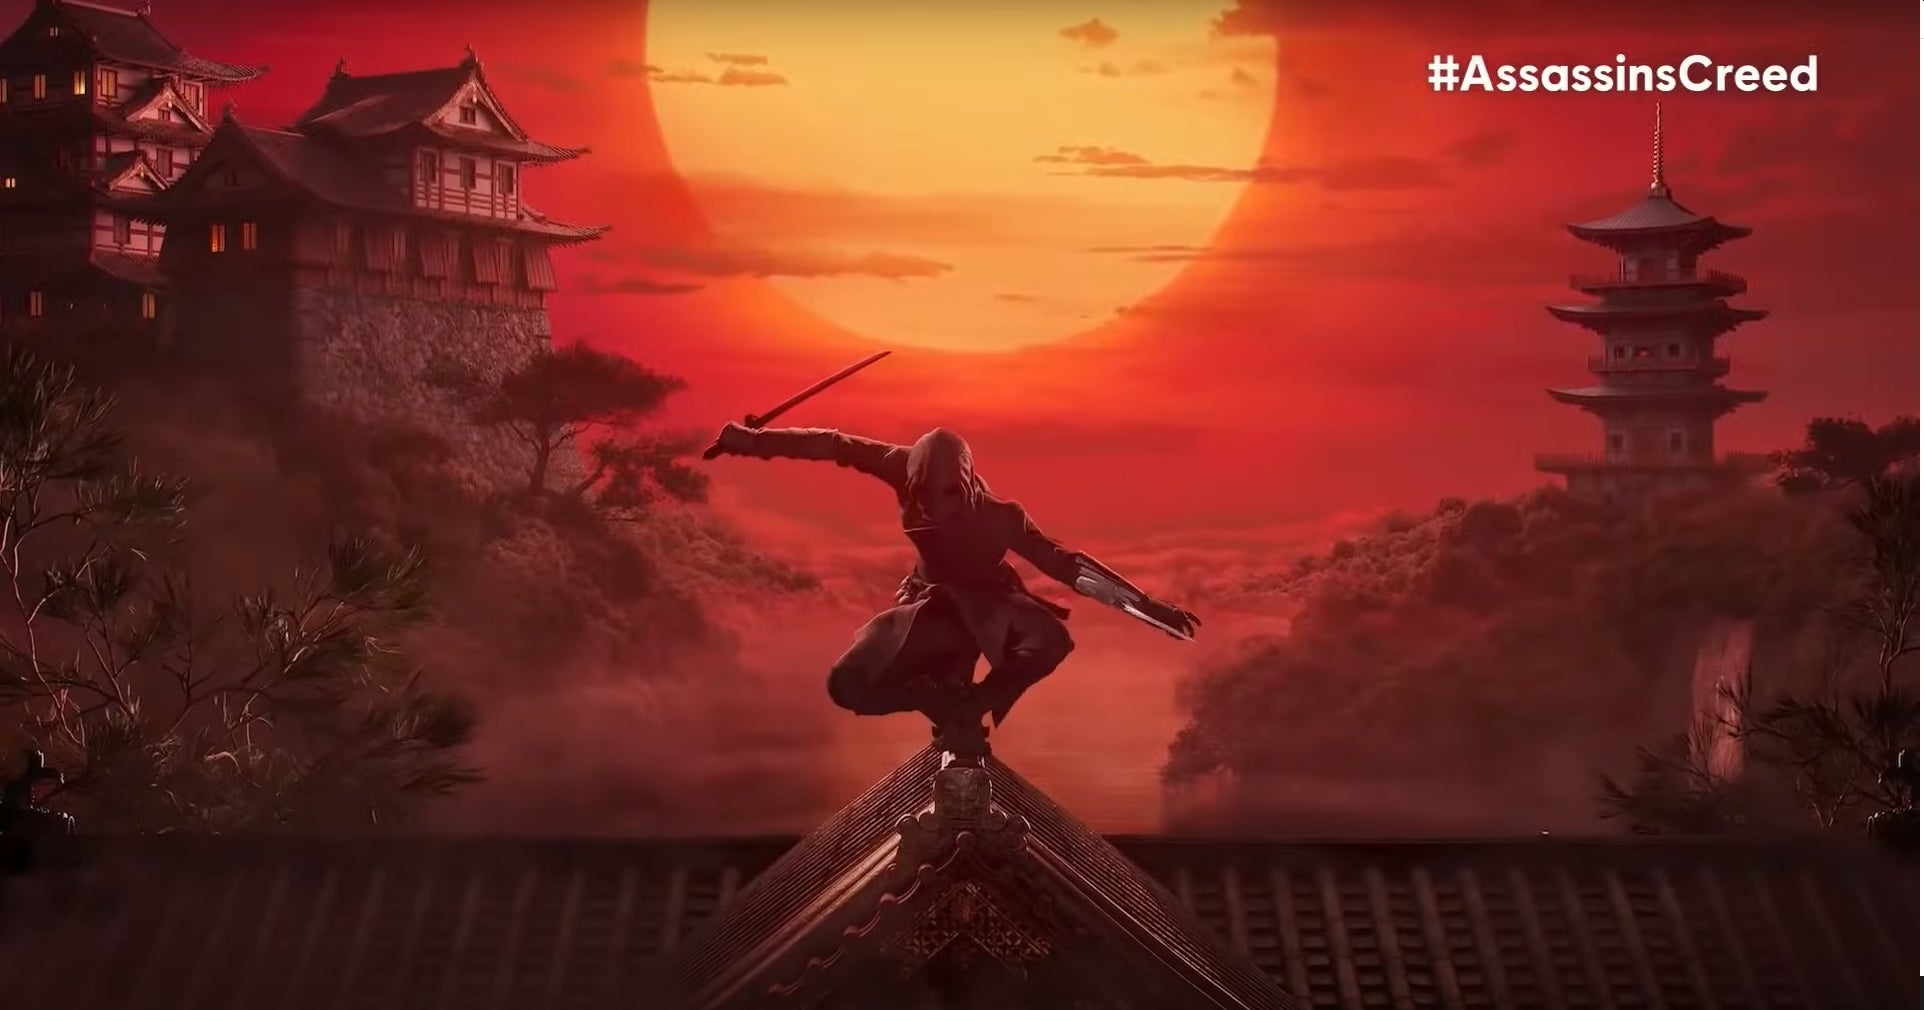 A shinobi crouches and poses on a rooftop in the key art for a future Assassin's Creed game set in feudal Japan.